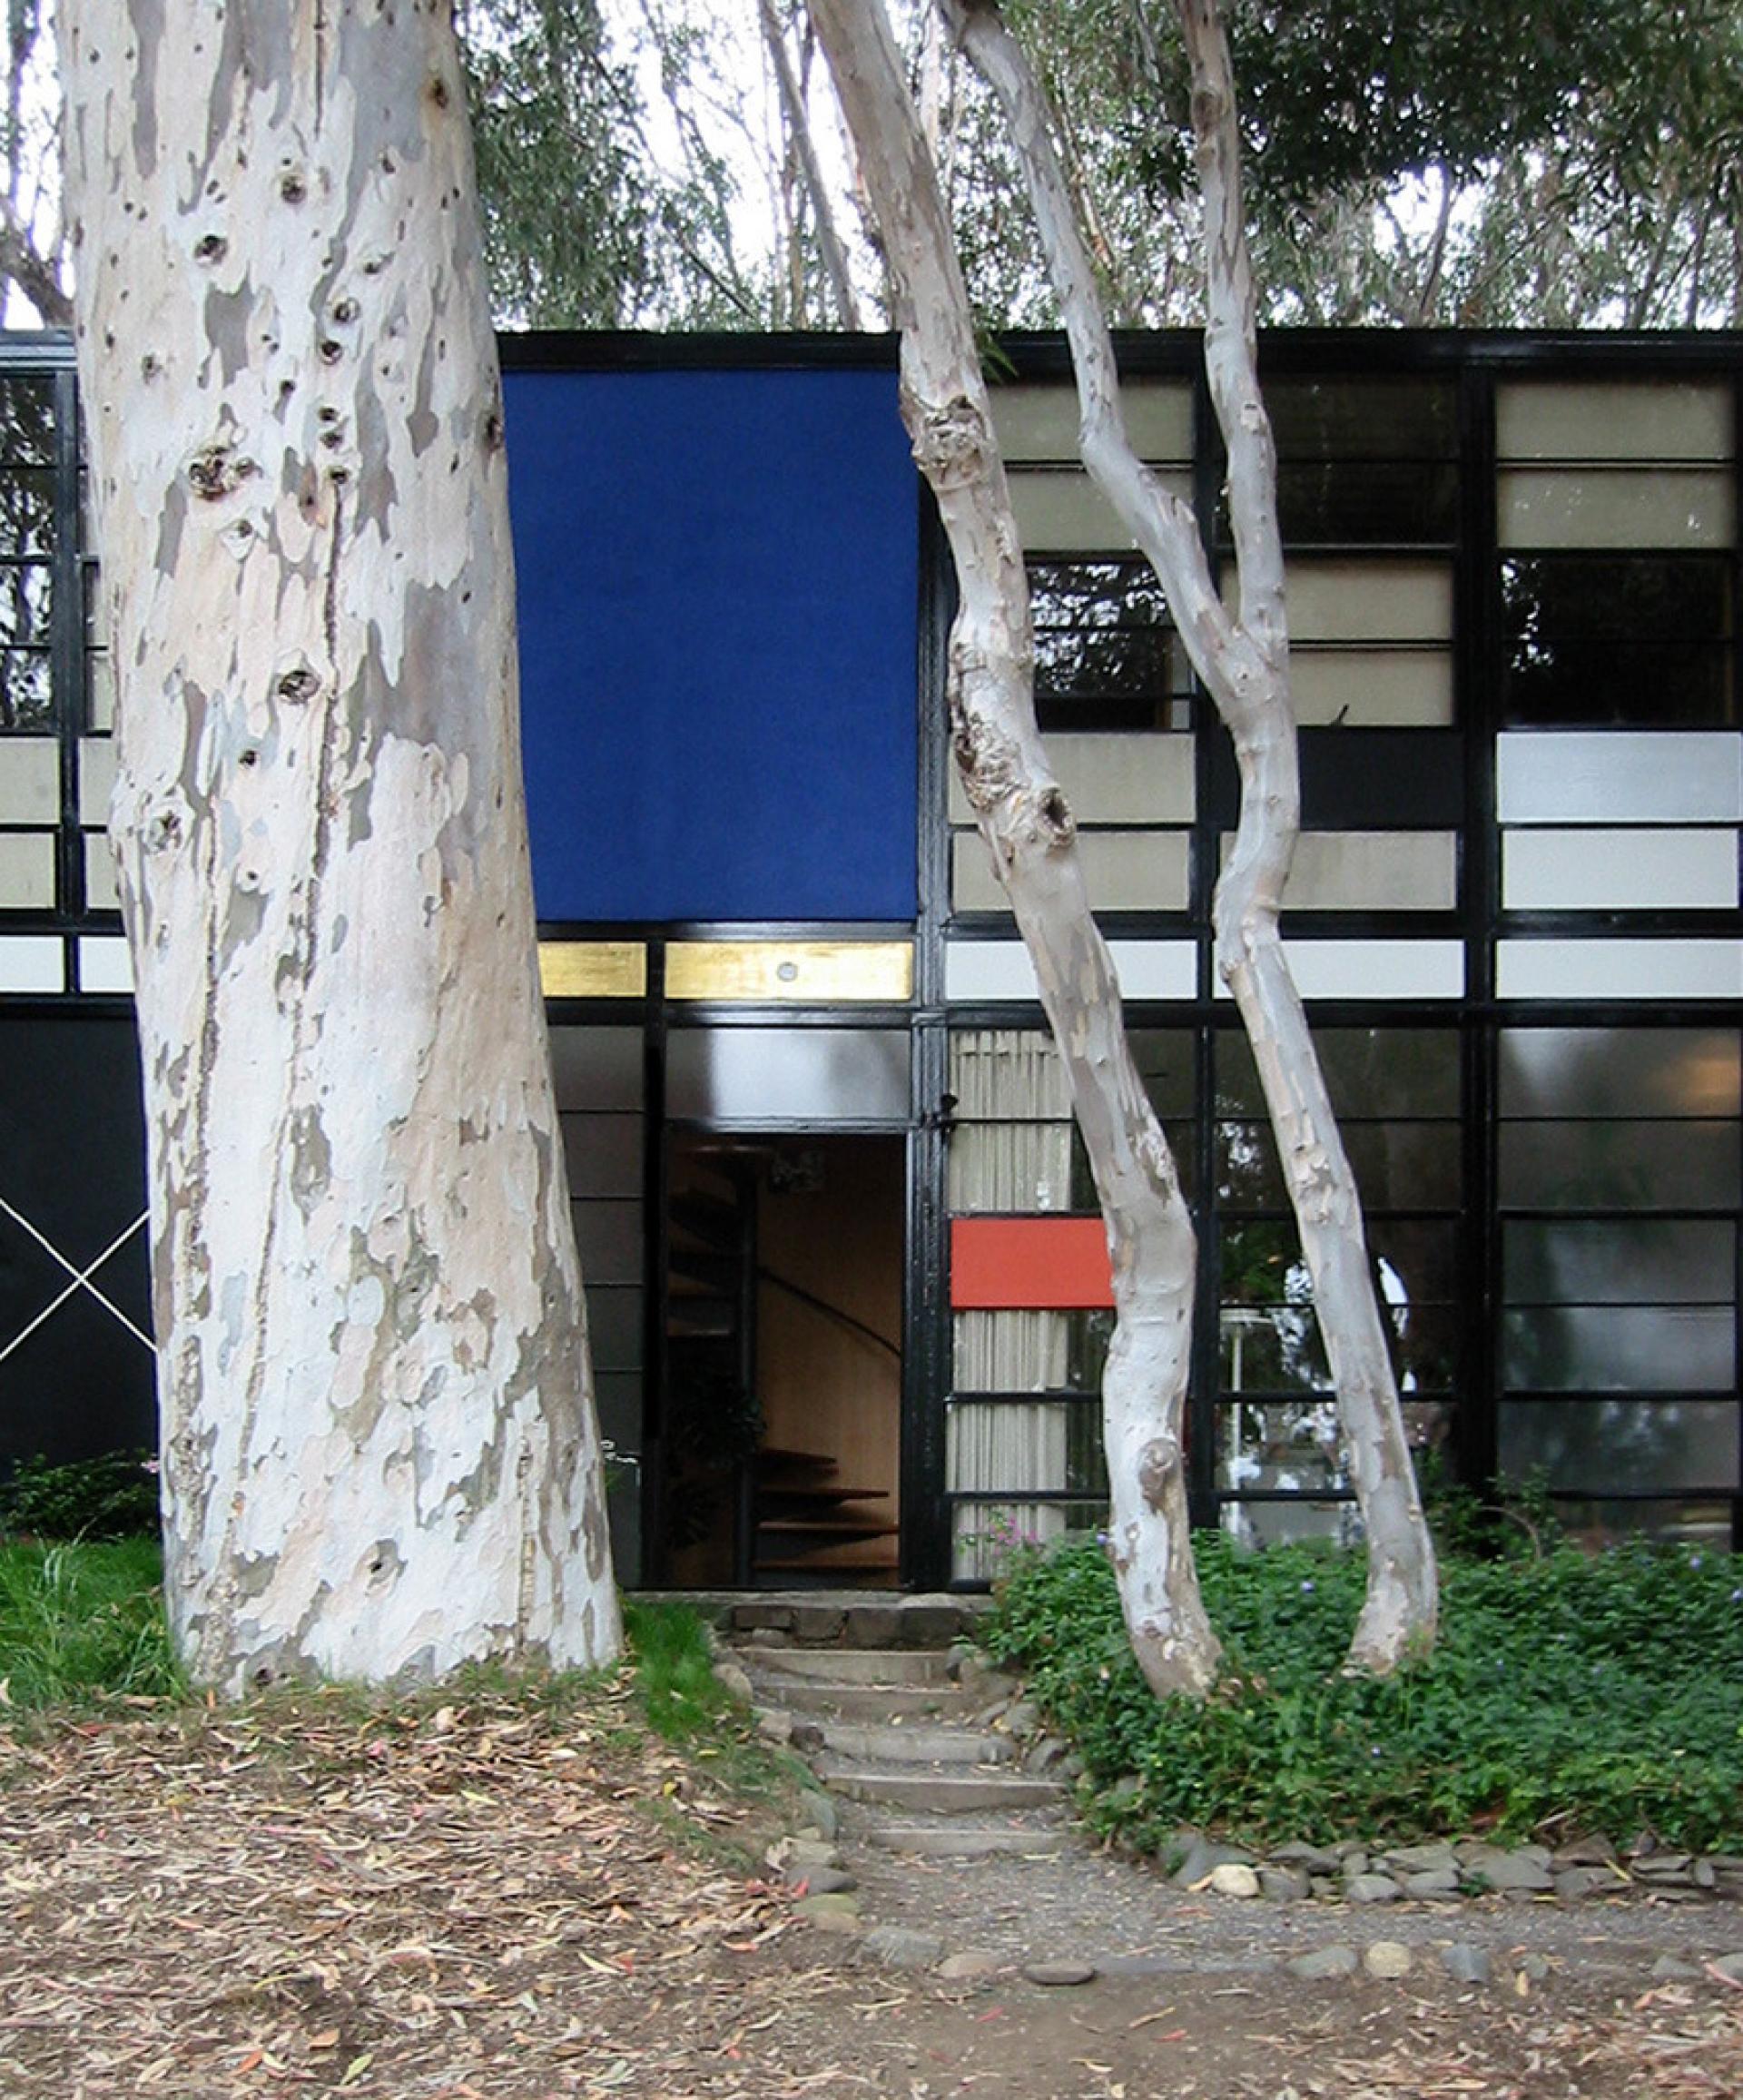 Case Study House #8 at the Pacific Palisades in LA. | Photo via Wikipedia